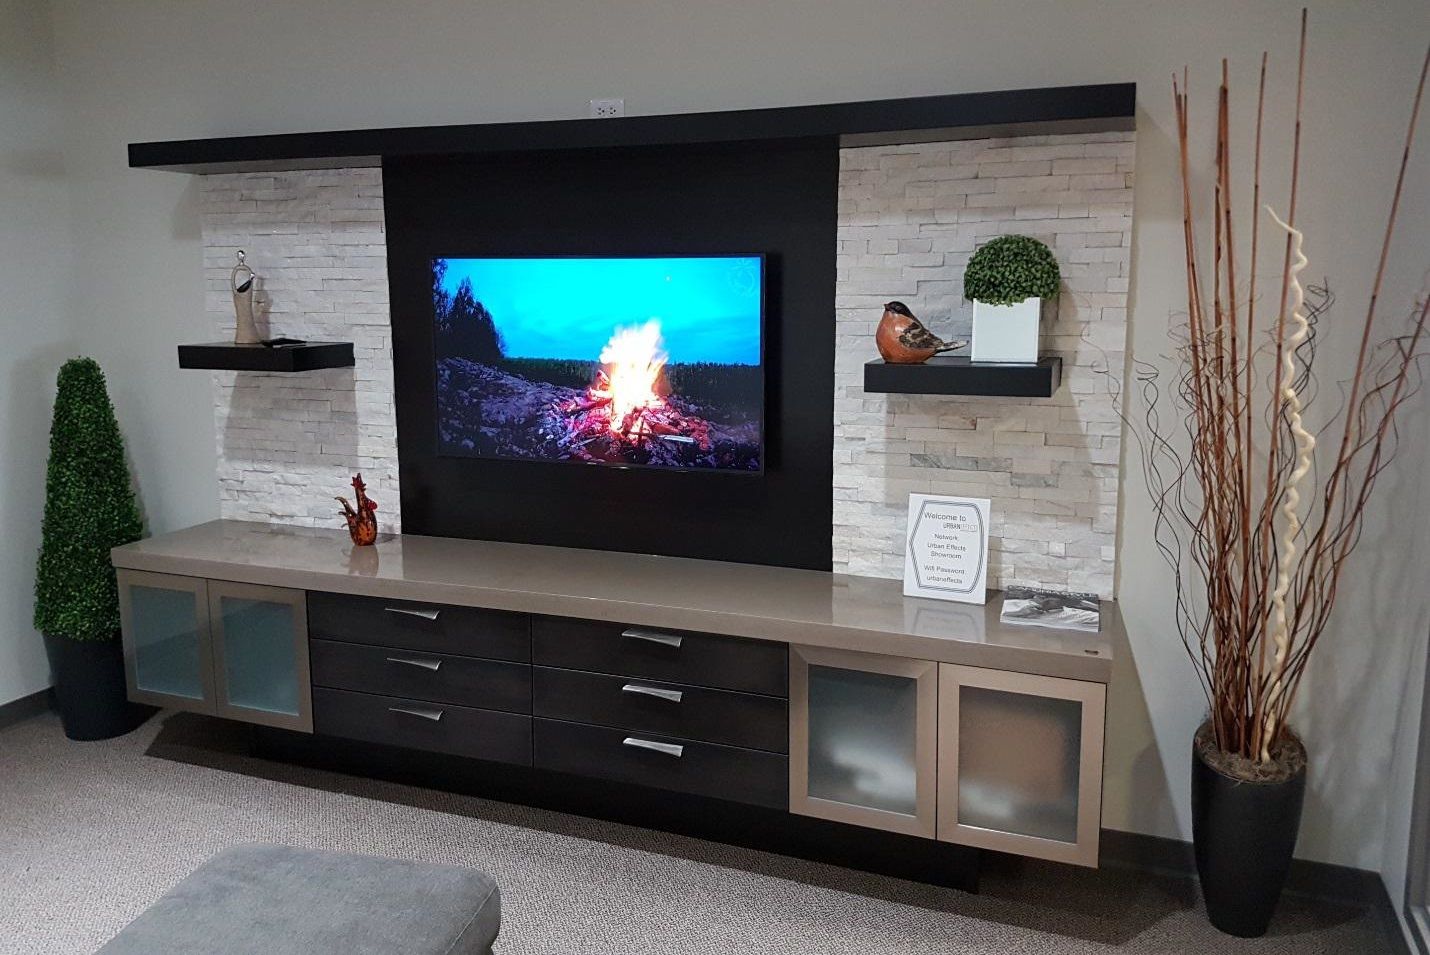 Make Your Home A Theater With Custom Built Entertainment Centers Regarding Rgb Tv Entertainment Centers (View 16 of 20)